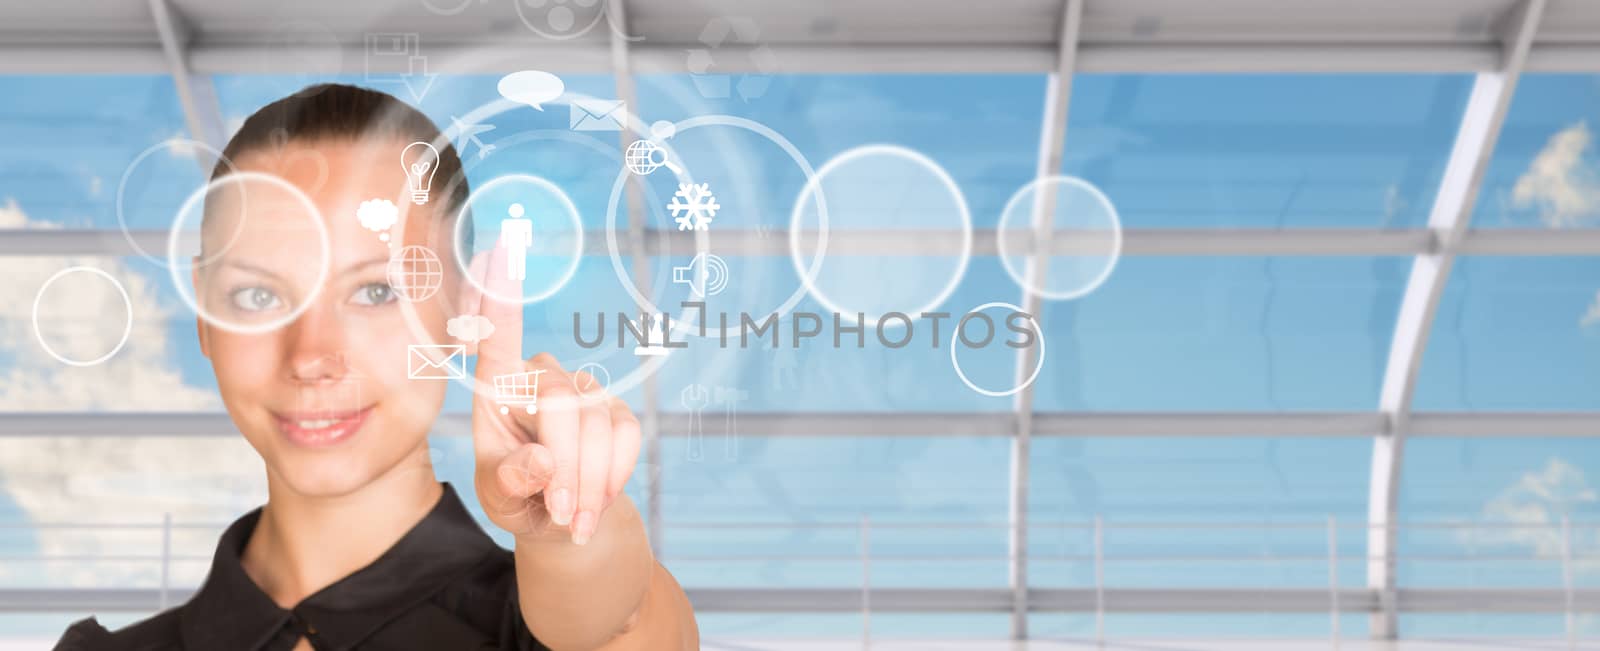 Young businesswoman in dress pressing on holographic screen with icons, close-up view